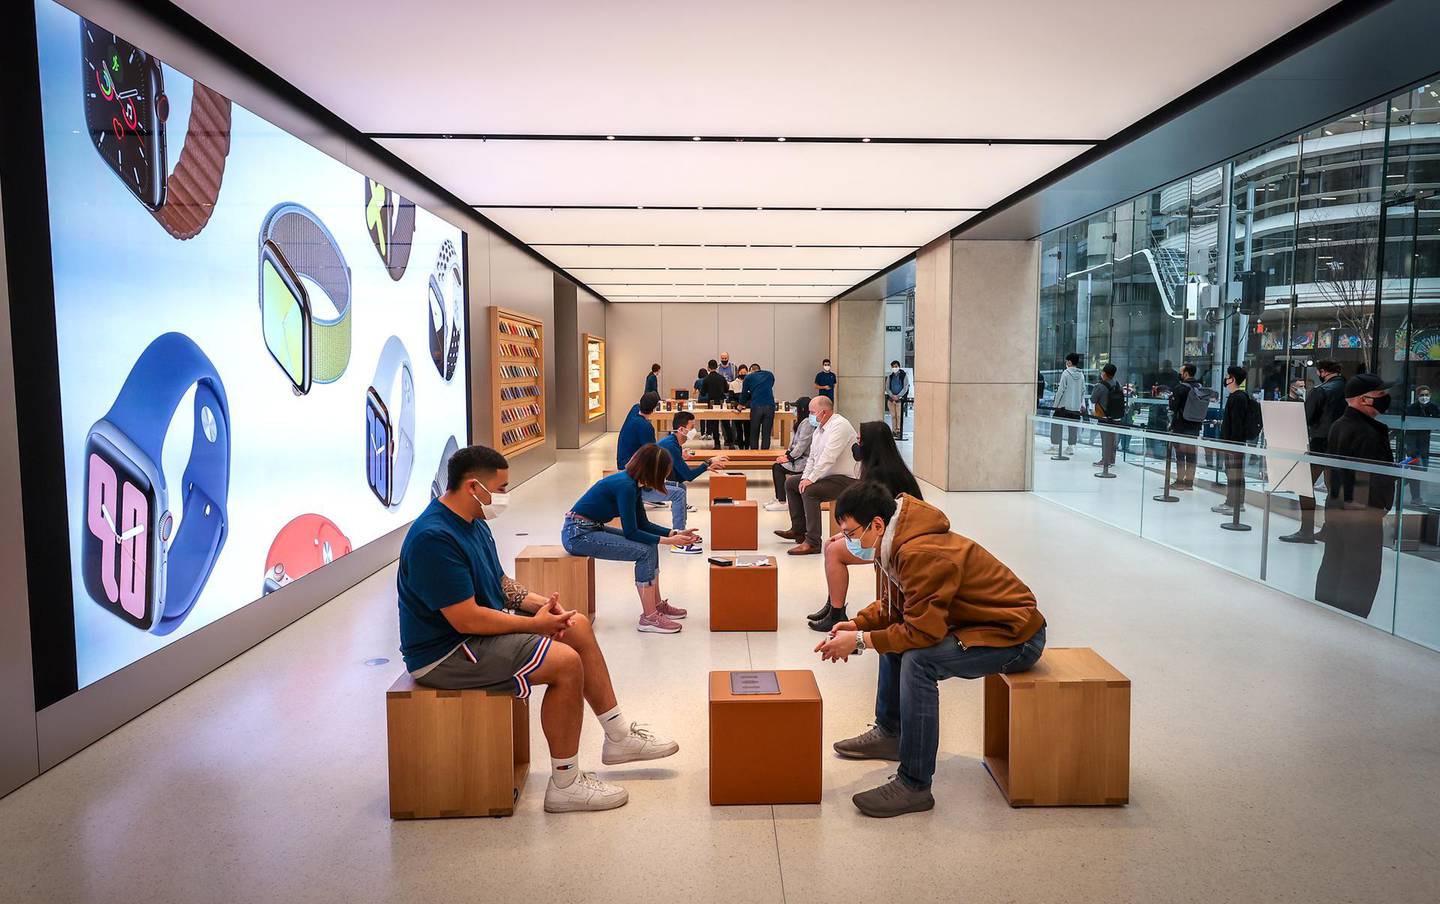 Employees wear protective masks while serving customers at the Apple Inc. flagship store in Sydney, Australia, on Friday, Sept. 18, 2020. Apple's annual Fall product blitz included new Apple Watches and an upgraded iPad Air. Later this year, the company is expected to unveil several new 5G iPhones. Photographer: David Gray/Bloomberg